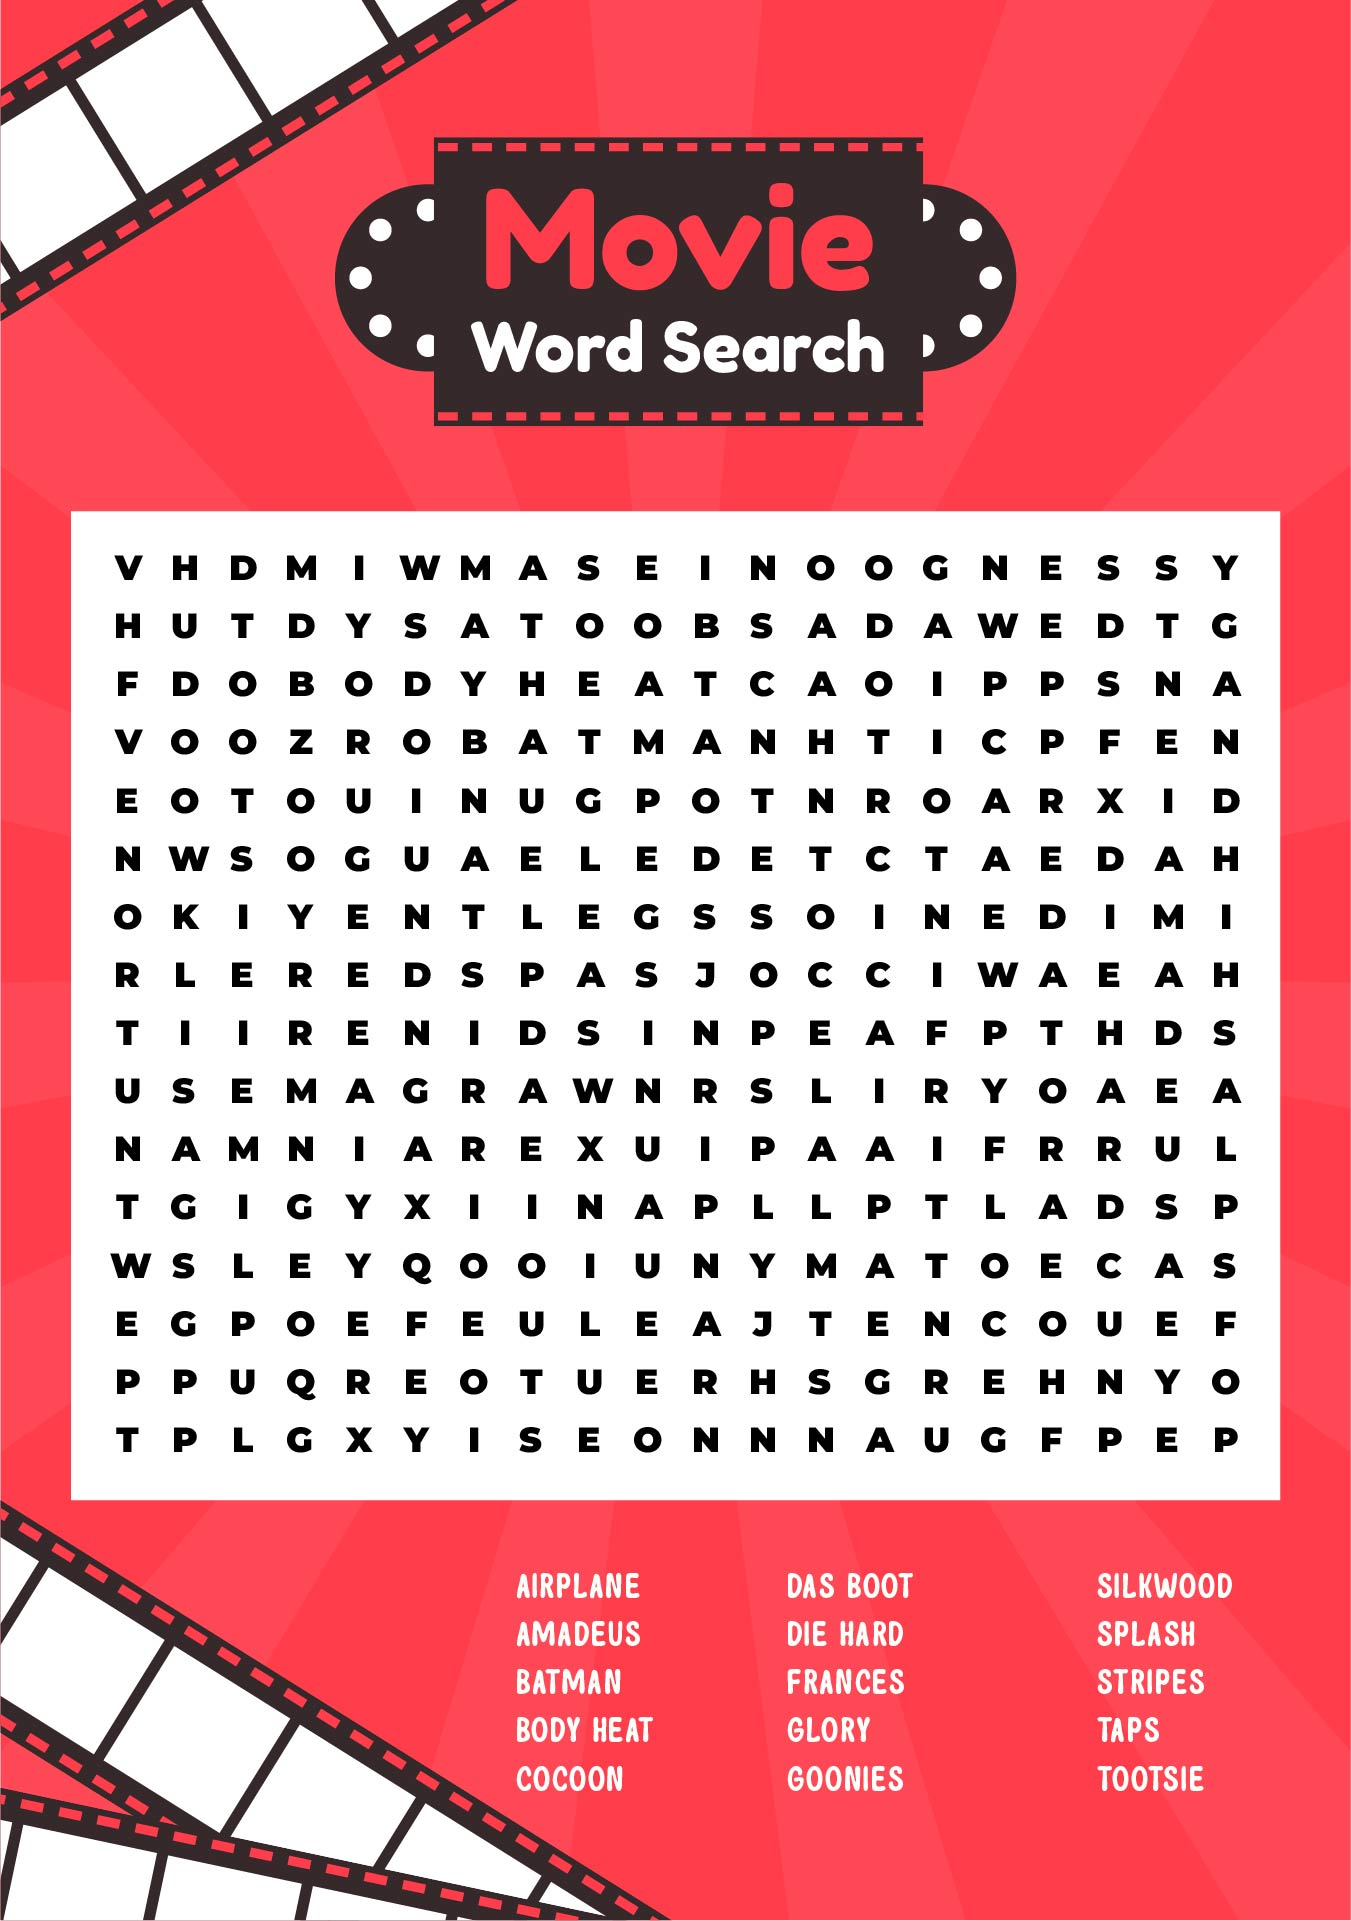 large-print-free-printable-word-searches-get-your-hands-on-amazing